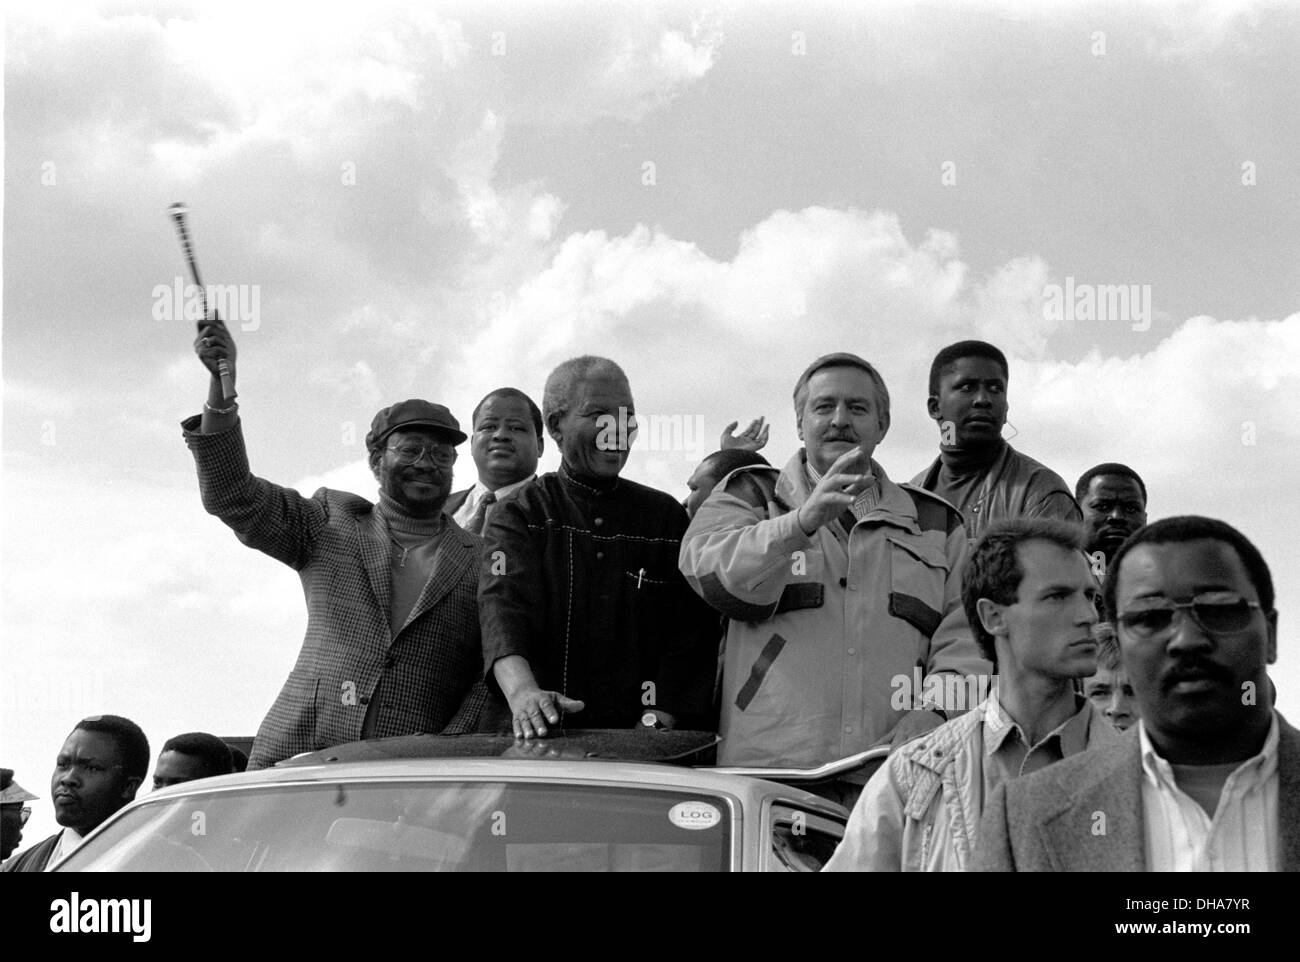 ipjr9301001101993 +- September East rand Johannesburg South Africa. Buthalezi, Mandela and Botha surrounded by their bodyguards Stock Photo